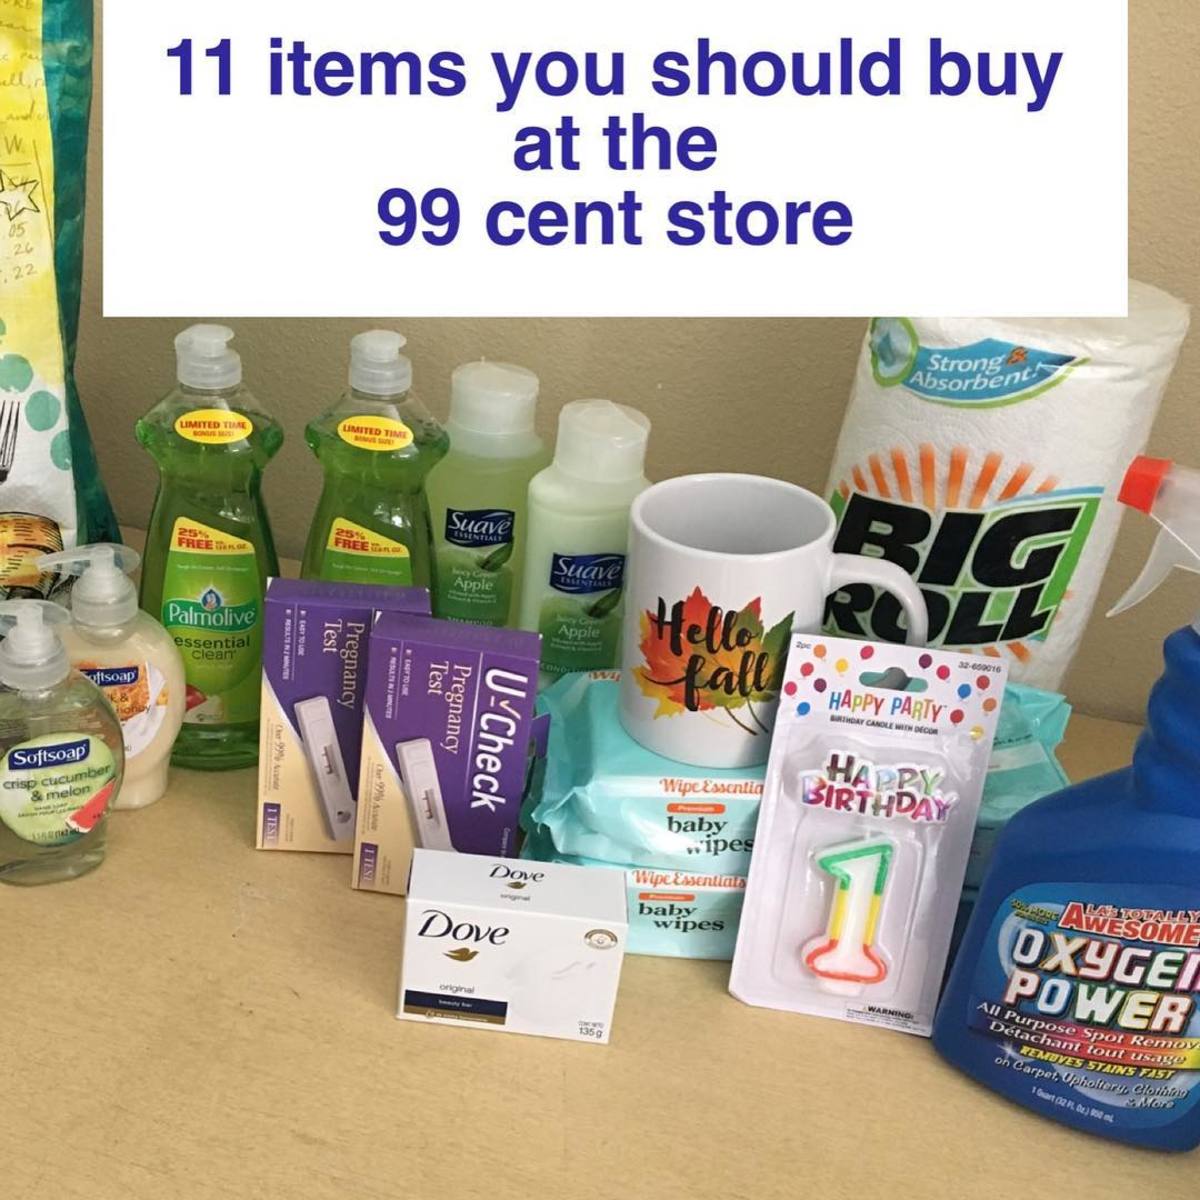 Five Reasons To Love 99-Cent Stores